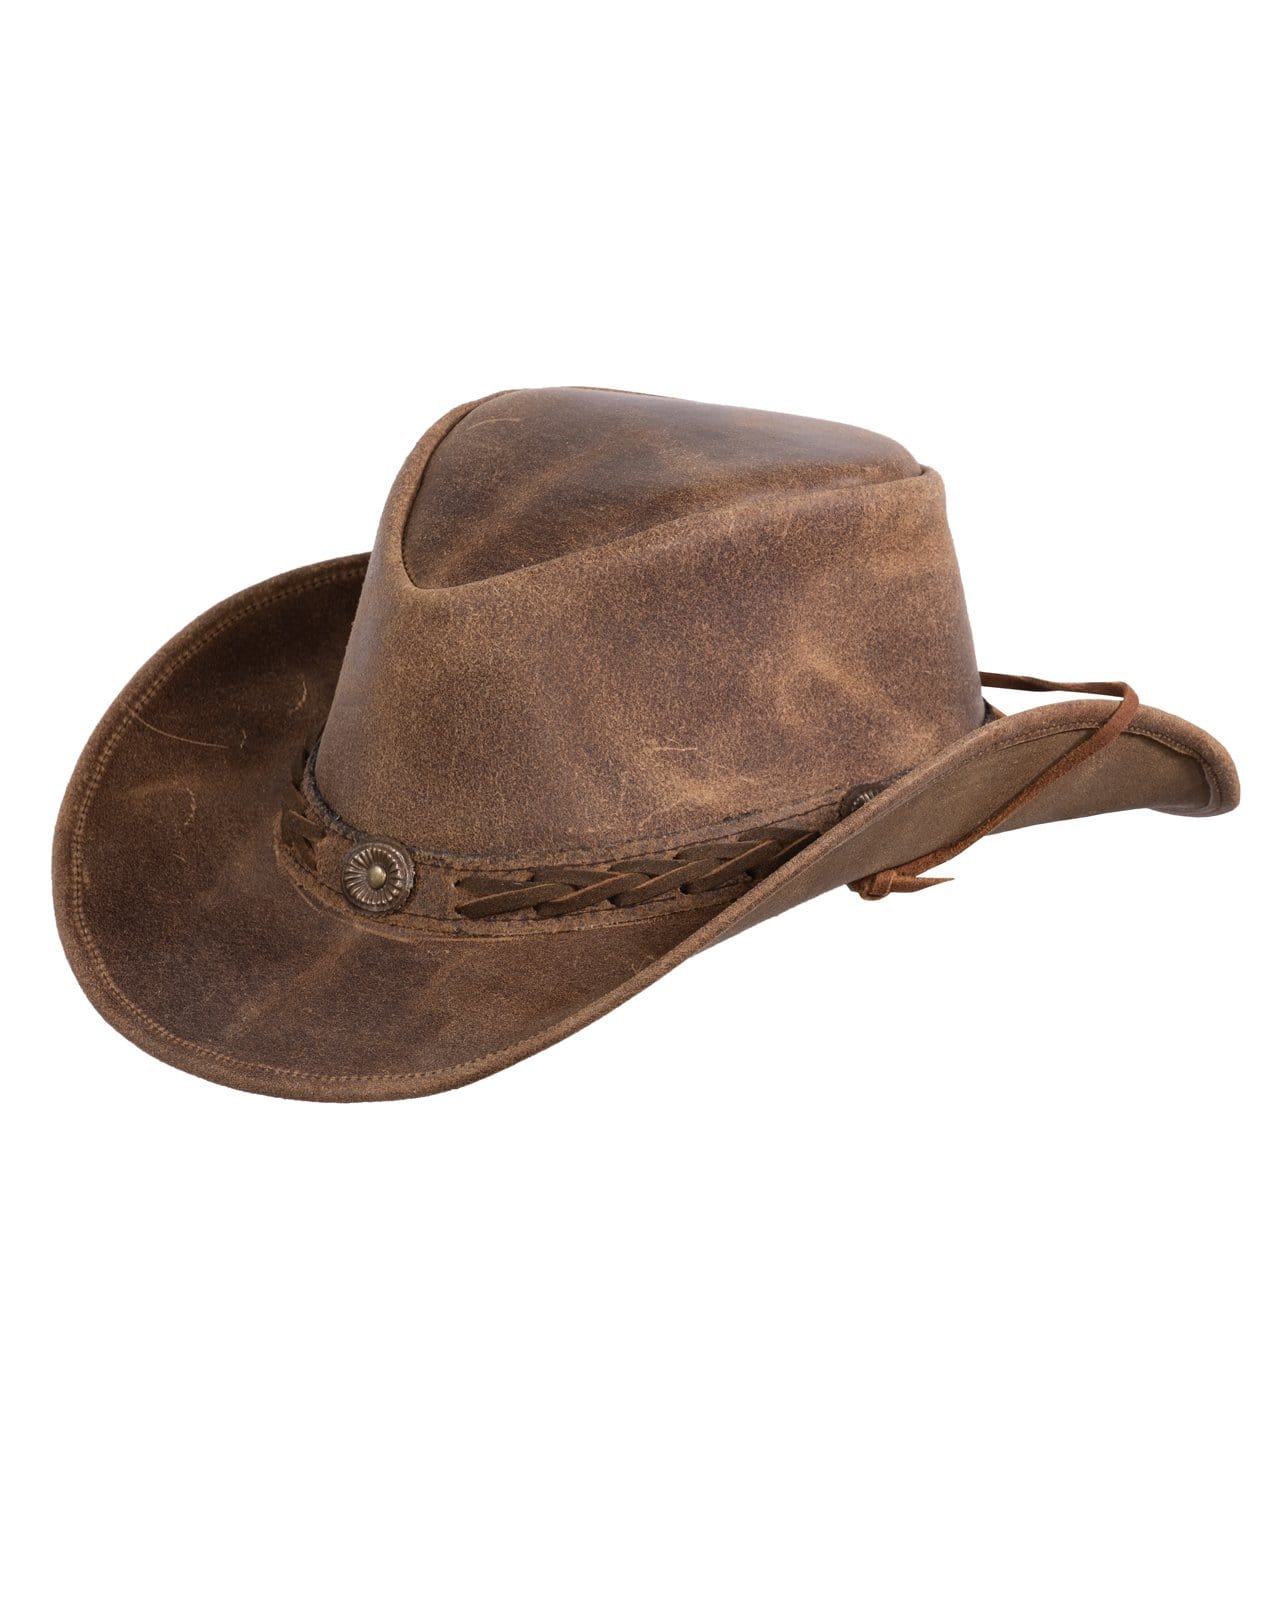  Western Outback Felt Cowboy Hat For Women Cowgirls Fedora  Gus Hat Rodeo 22-22.75 Fit For M/L